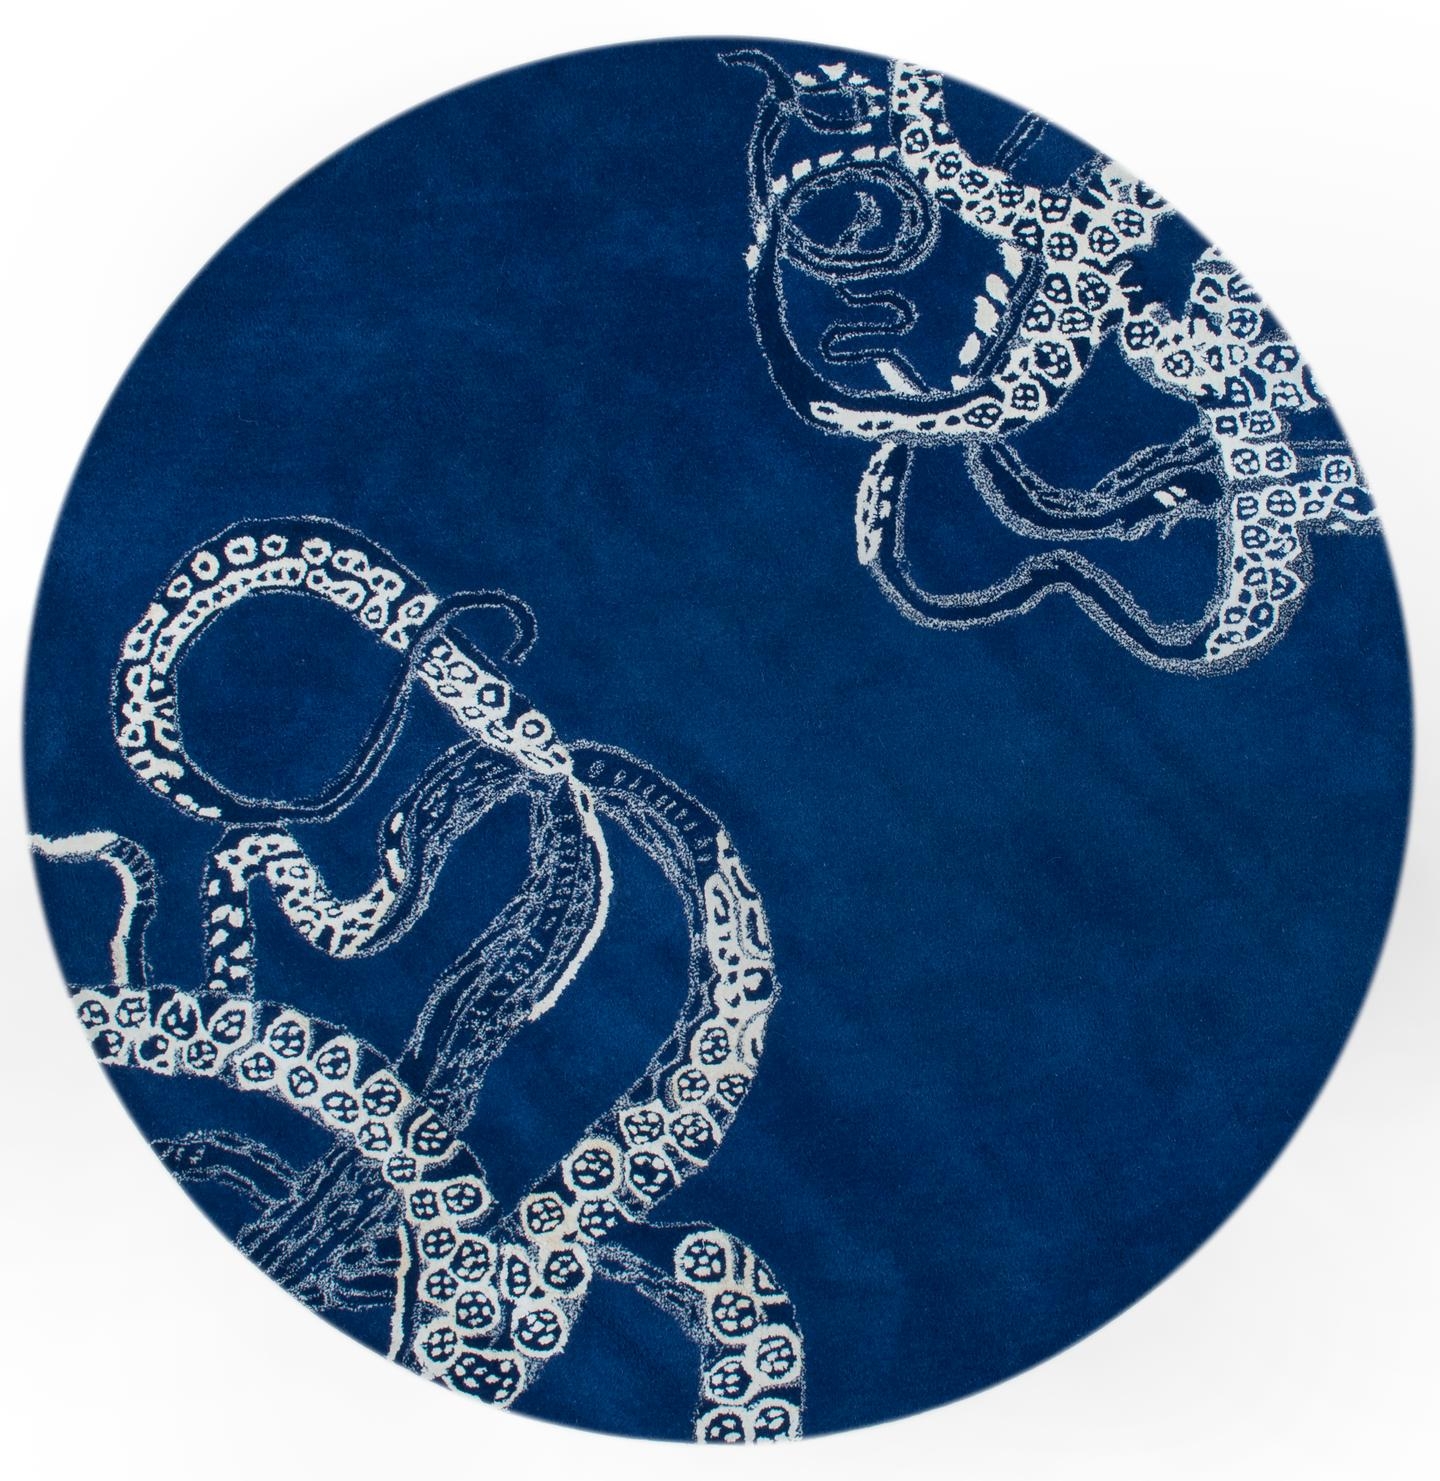  Hand Tufted Octopus Tail Area Rug - Image 2